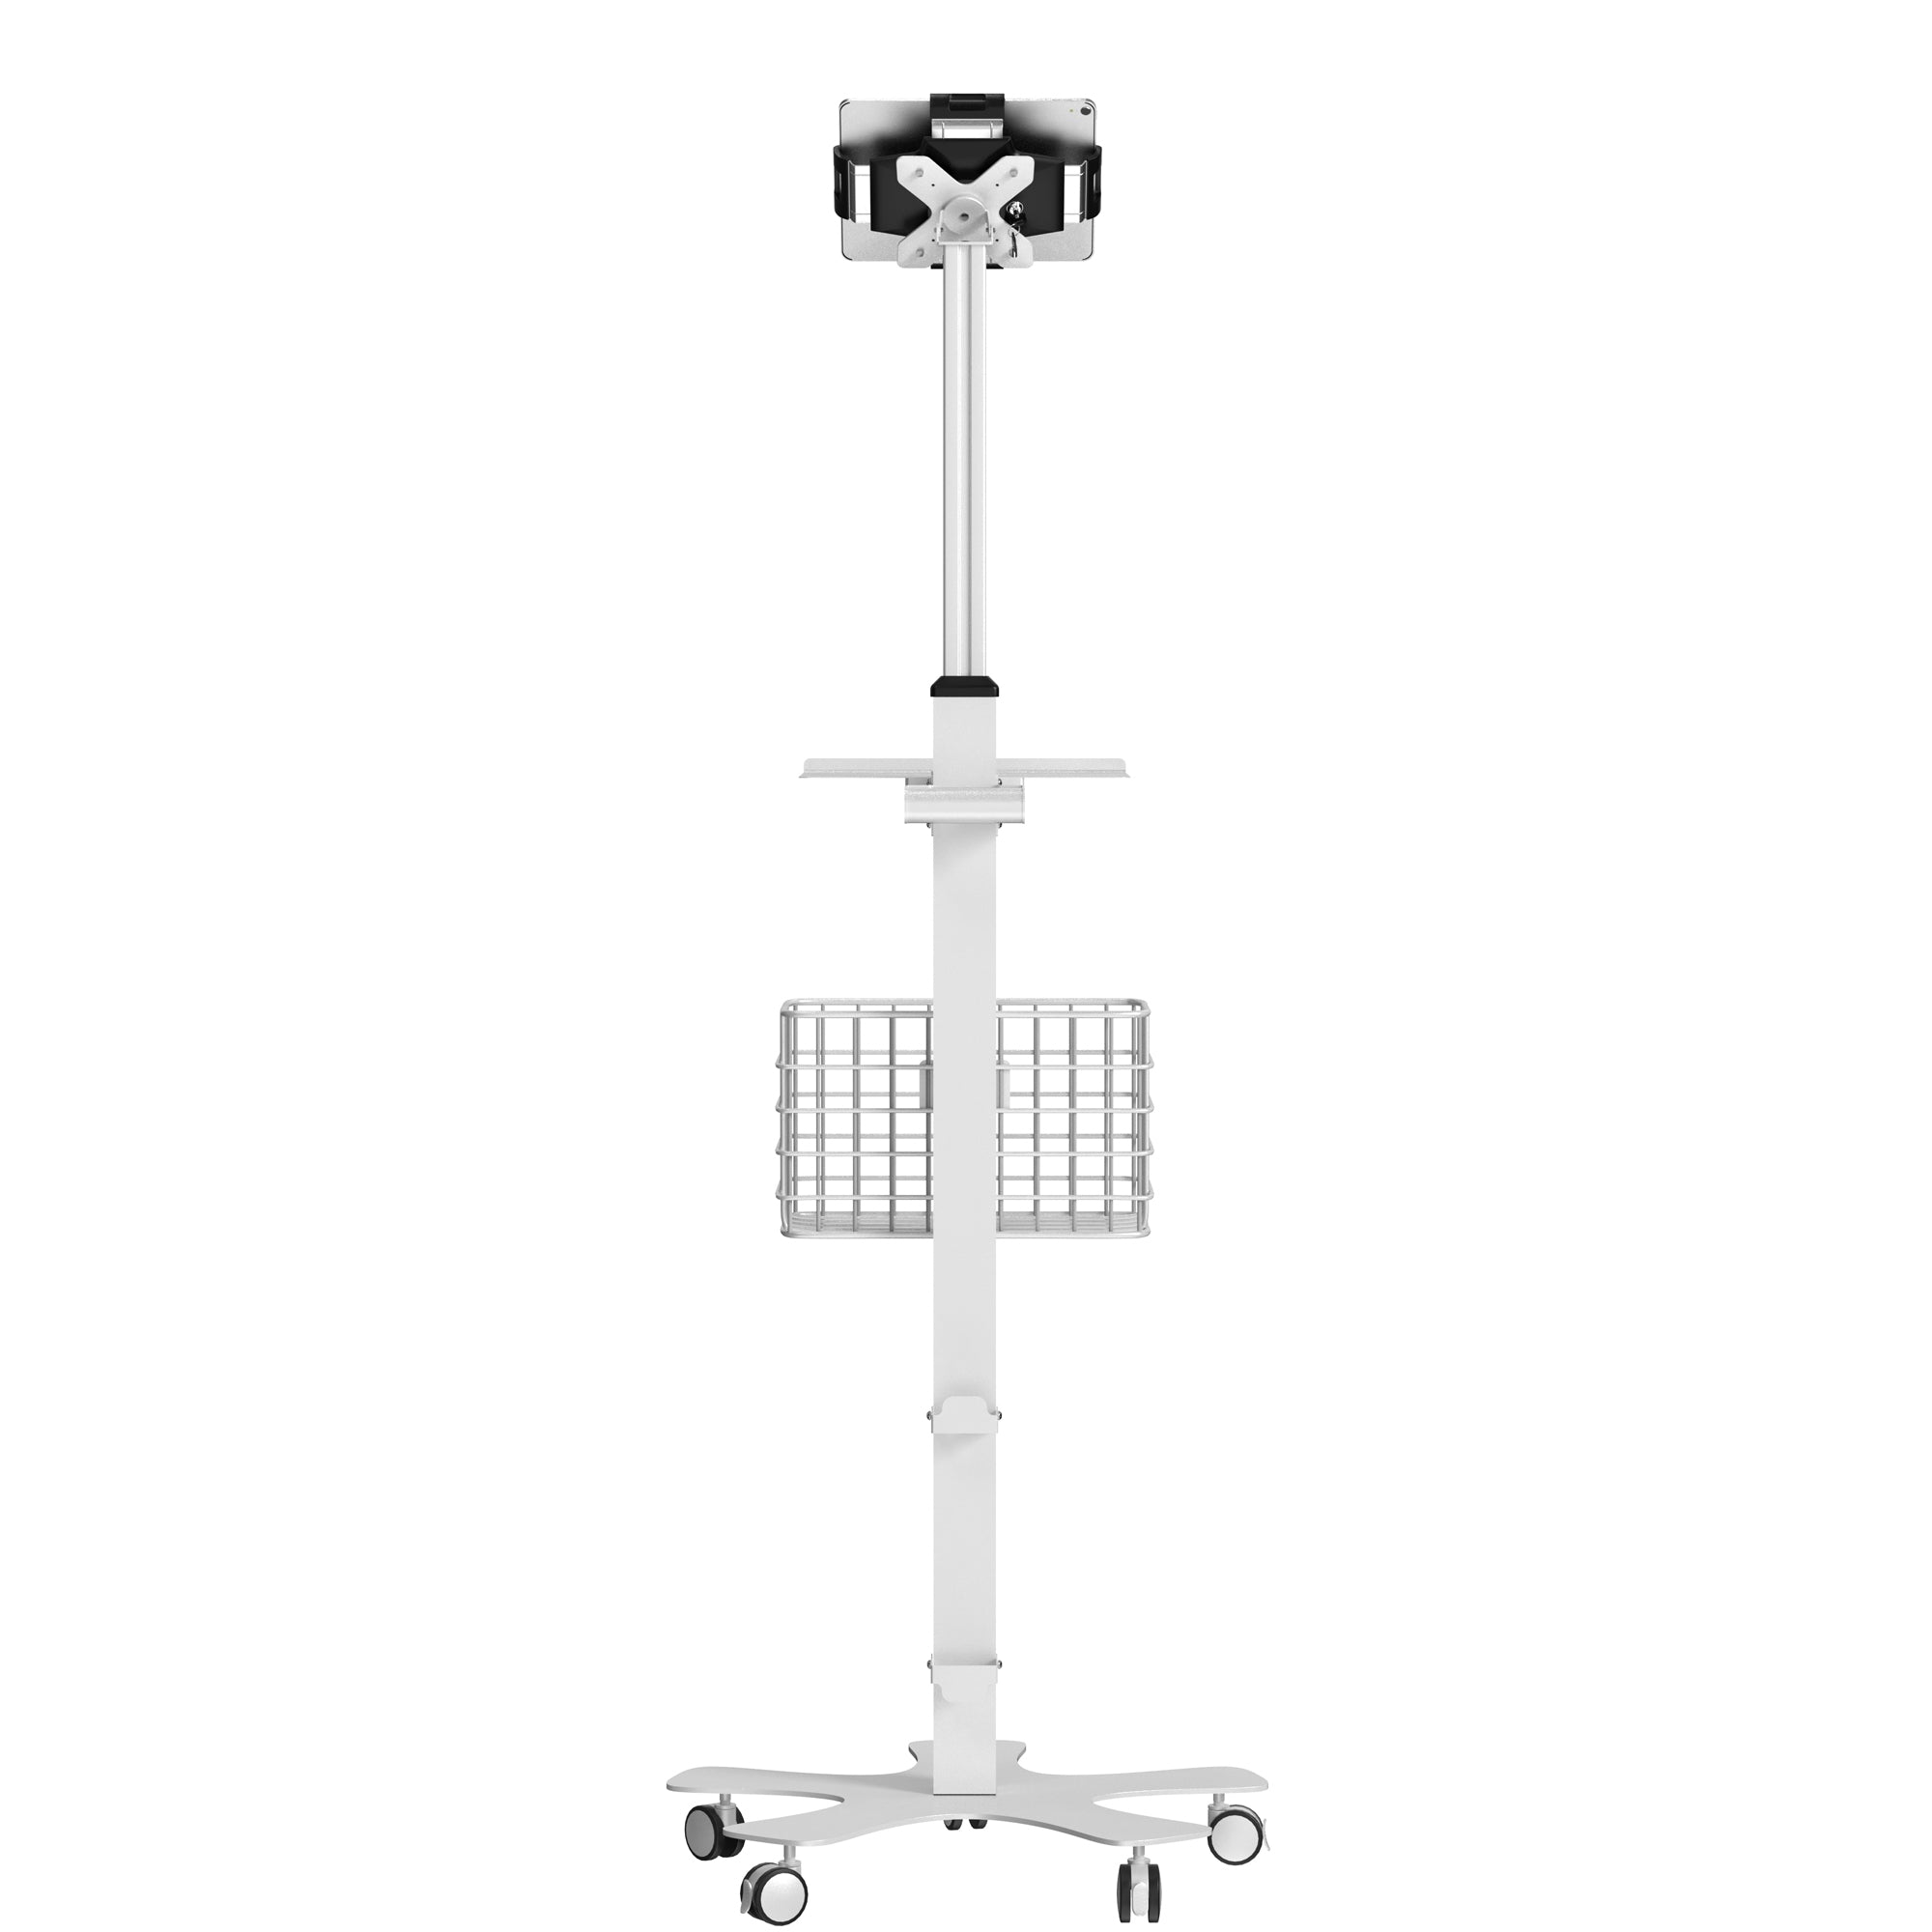 Medical Mobile Floor Stand with VESA Tablet Security Holder 9.75 - 13-inches